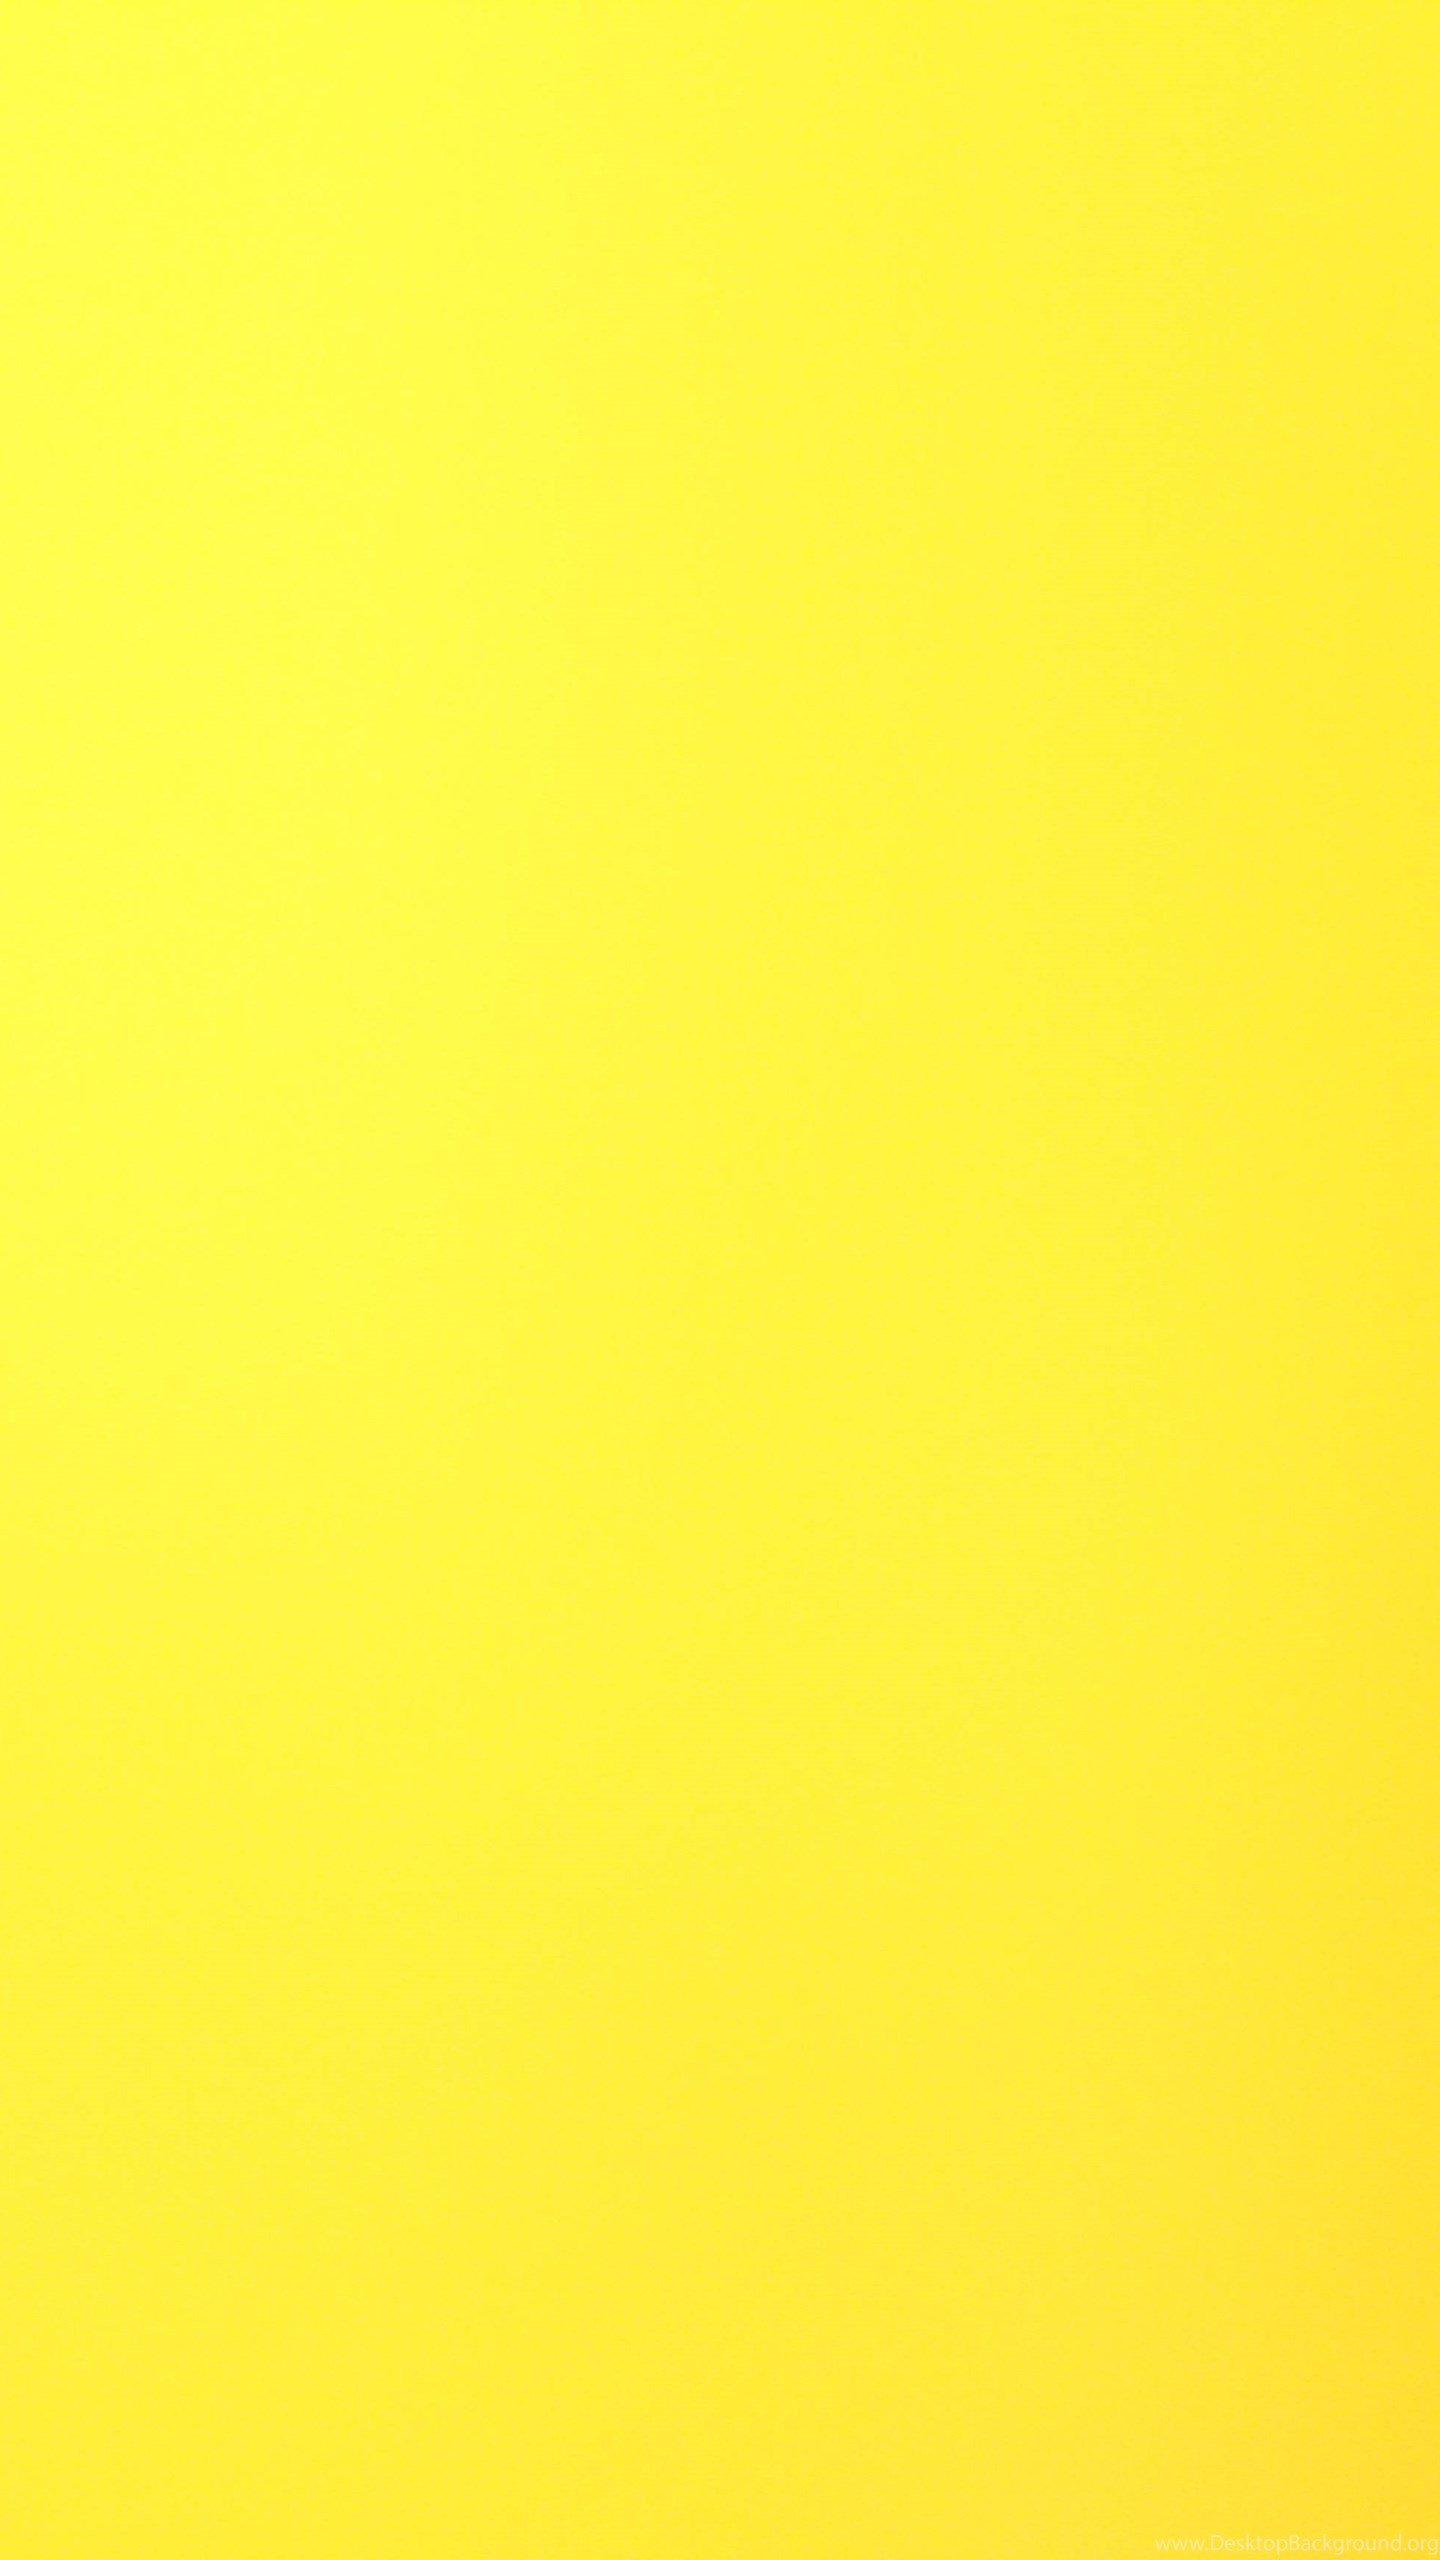 Simple yellow backgrounds